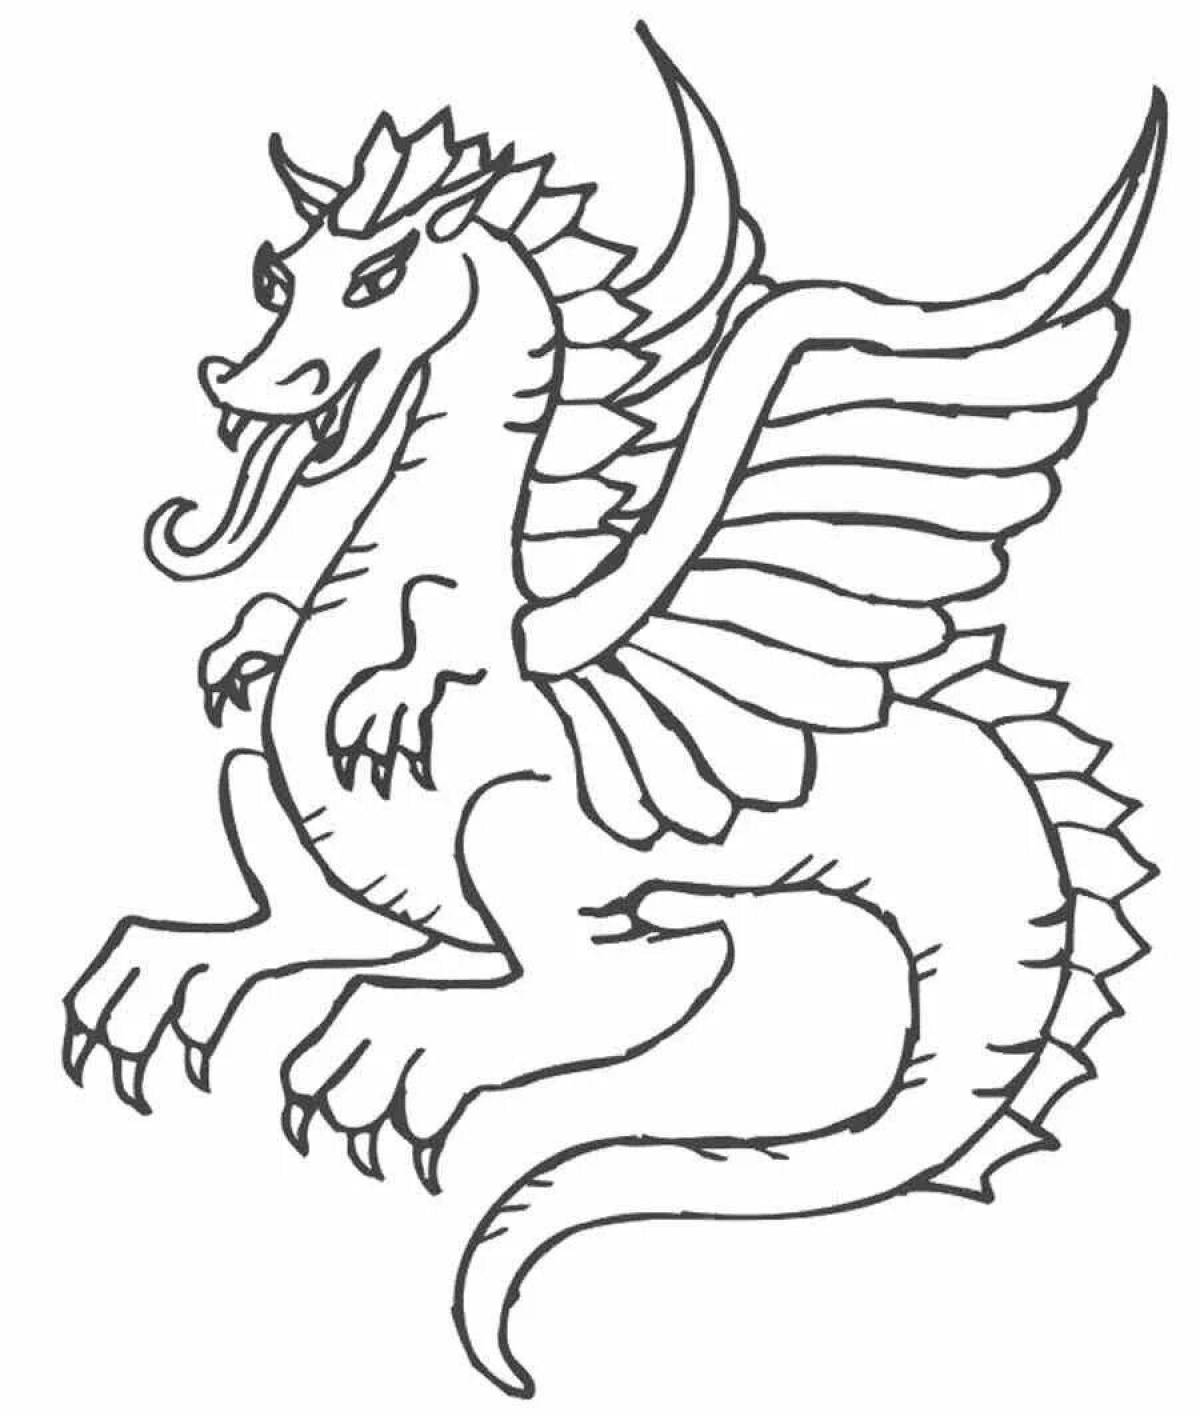 Violent Chinese dragon coloring book for kids